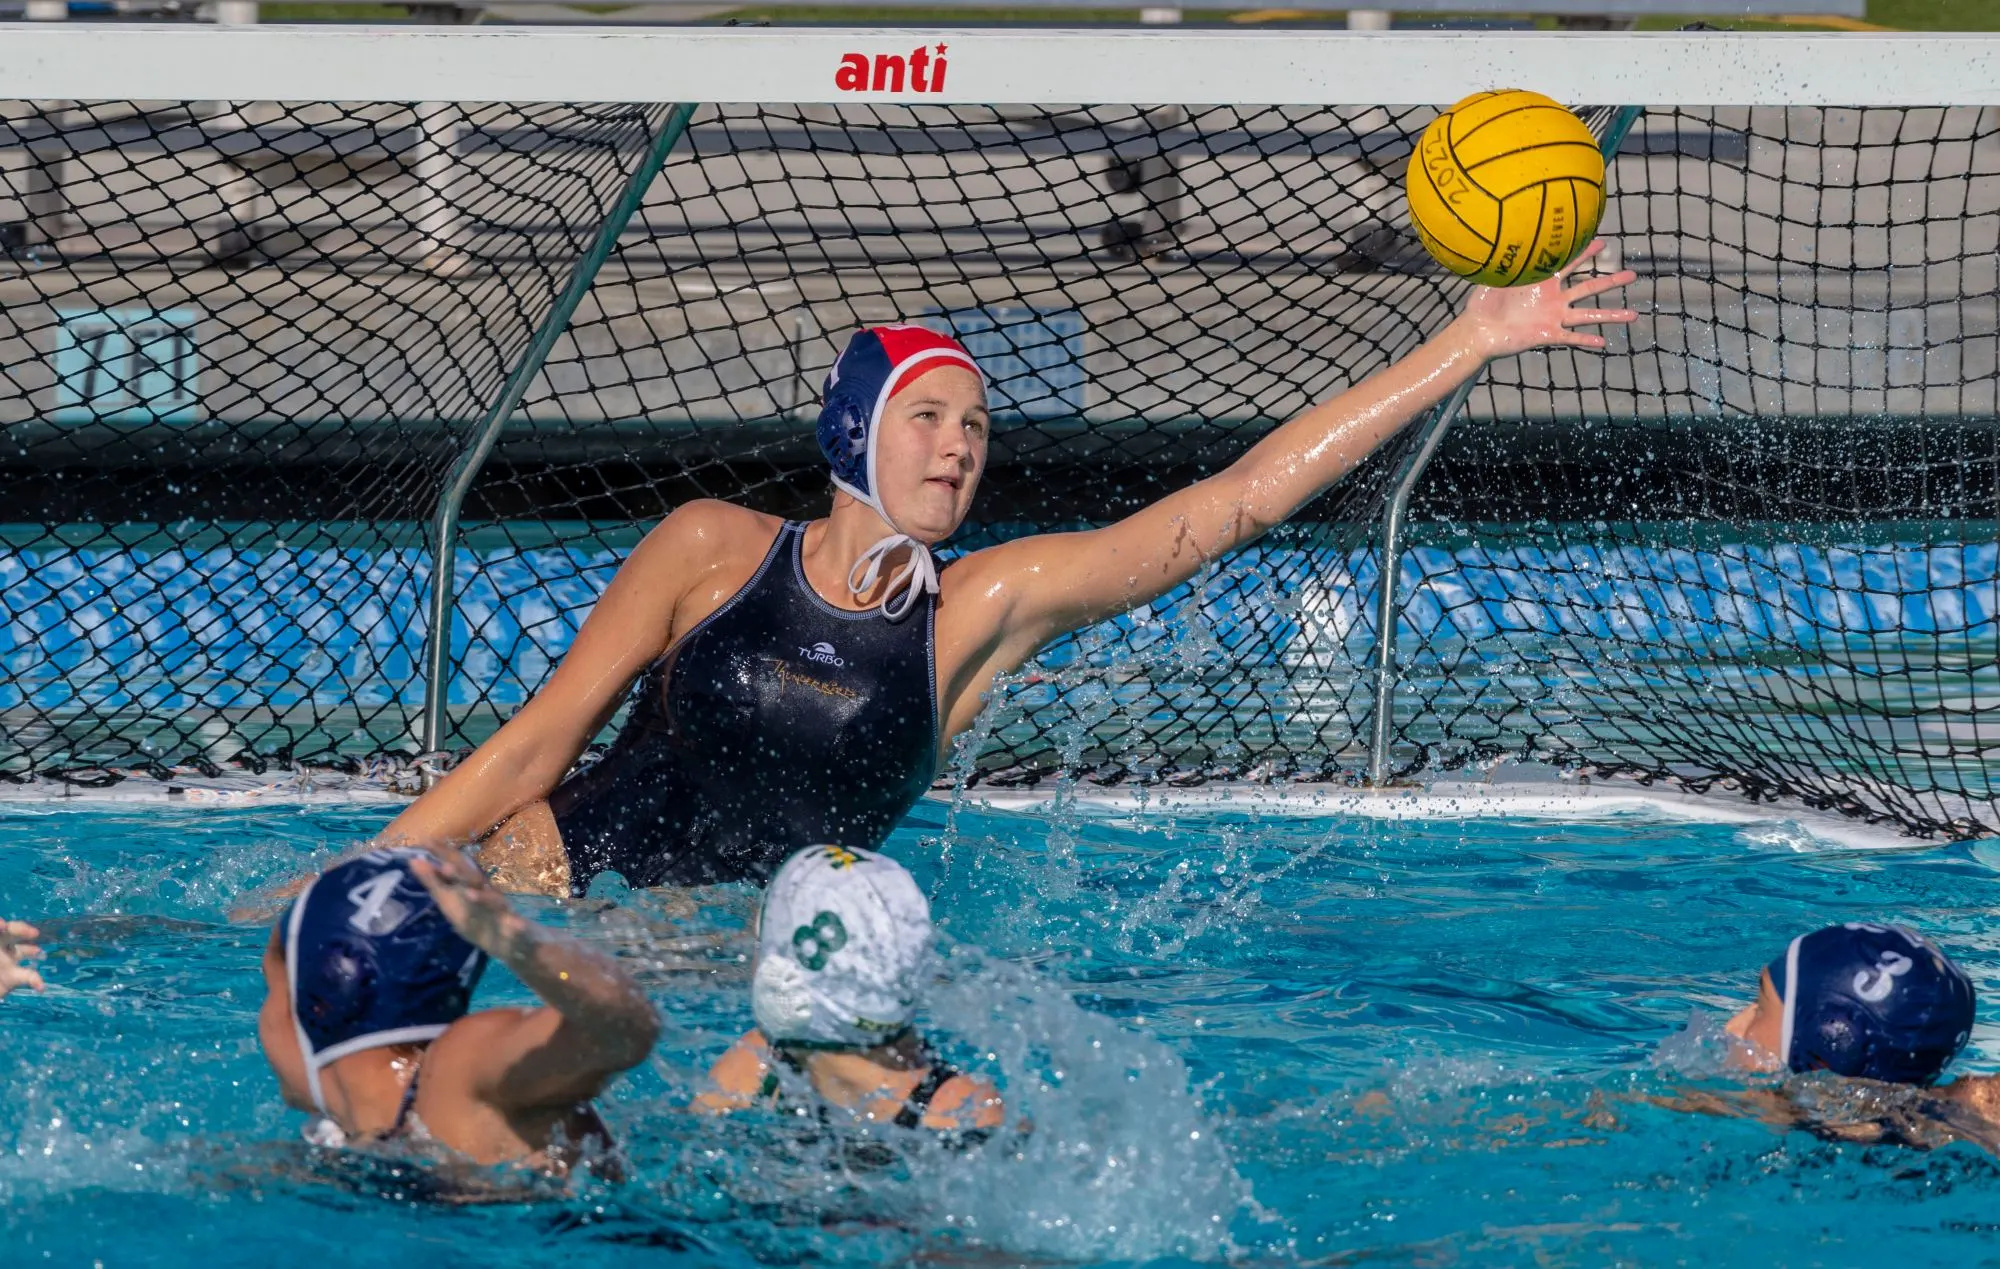 Water Polo: Yucaipa goalkeeper Christine Carpenter blocks a shot on goal during the CIF-SS Division 2 match. 2000x1270 HD Background.